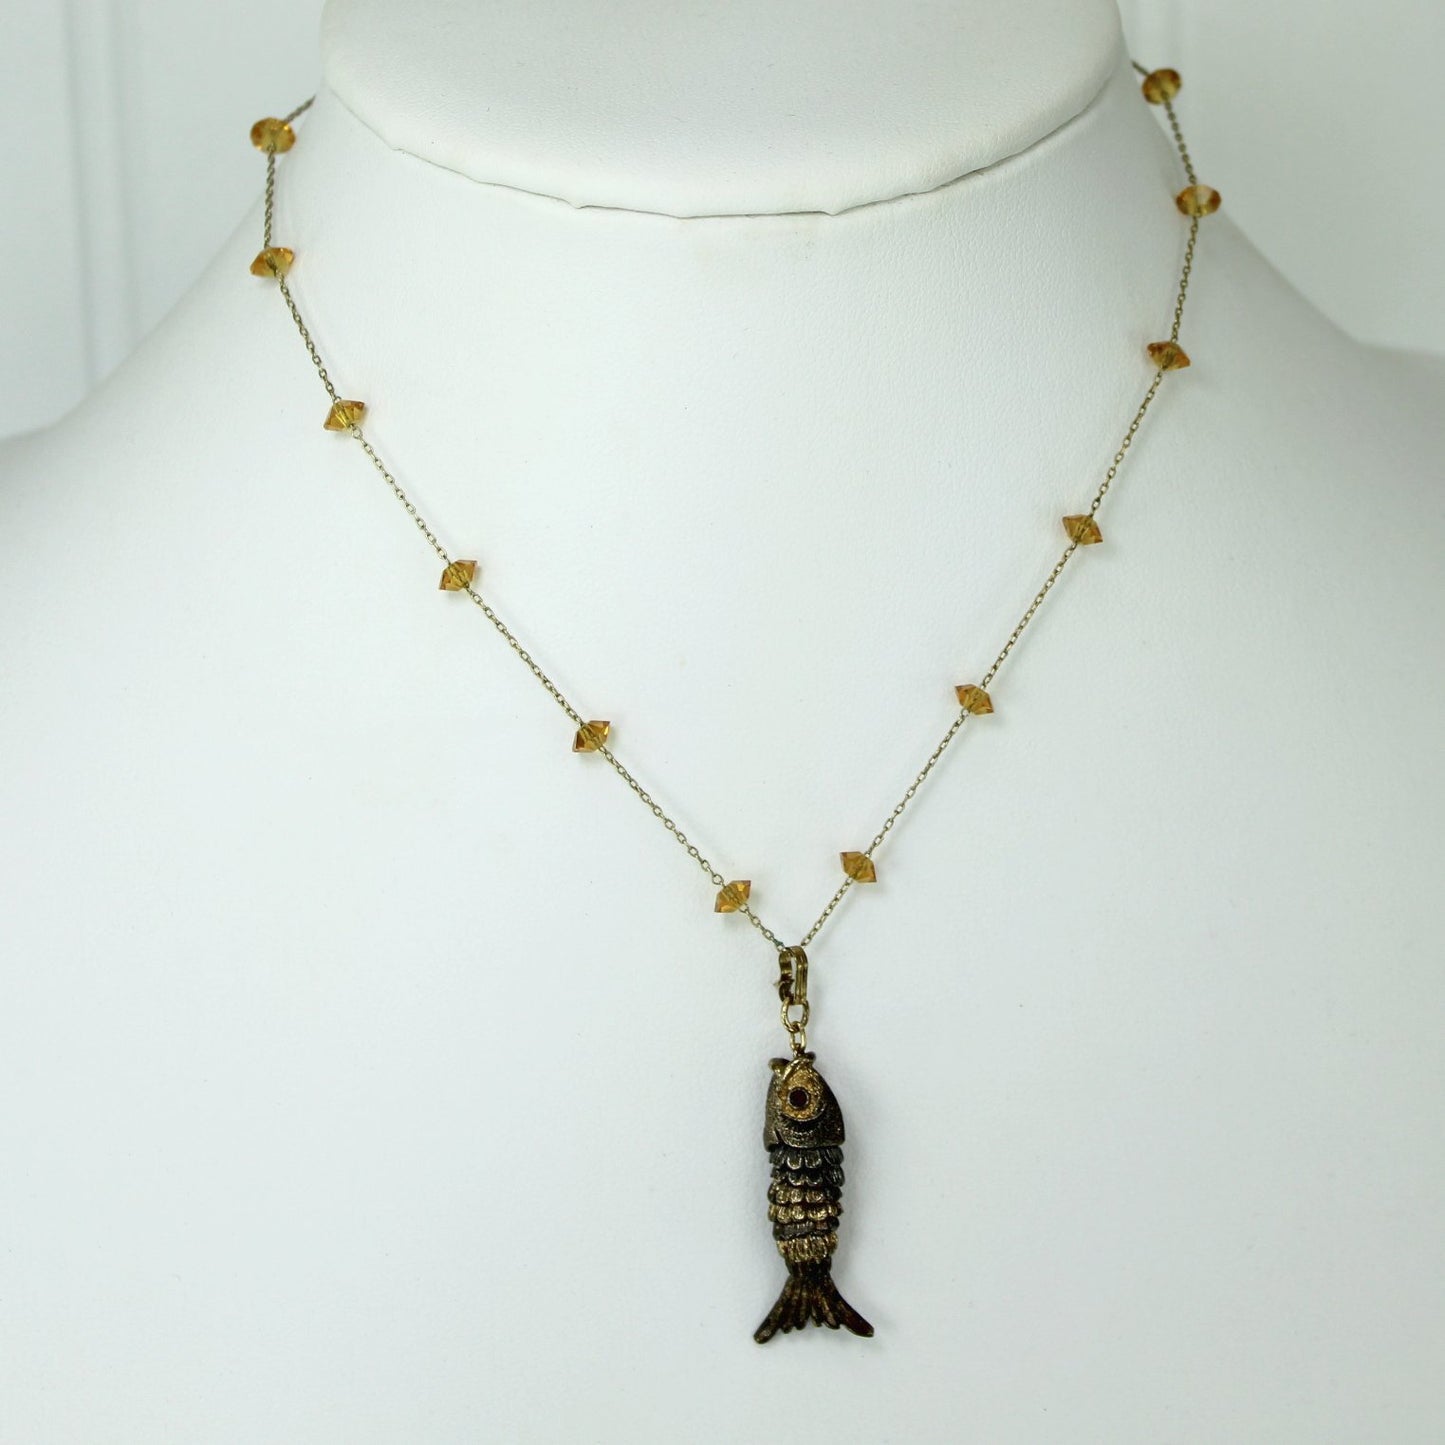 Stunning Necklace Monet Articulated Fish Amber Crystal Chain